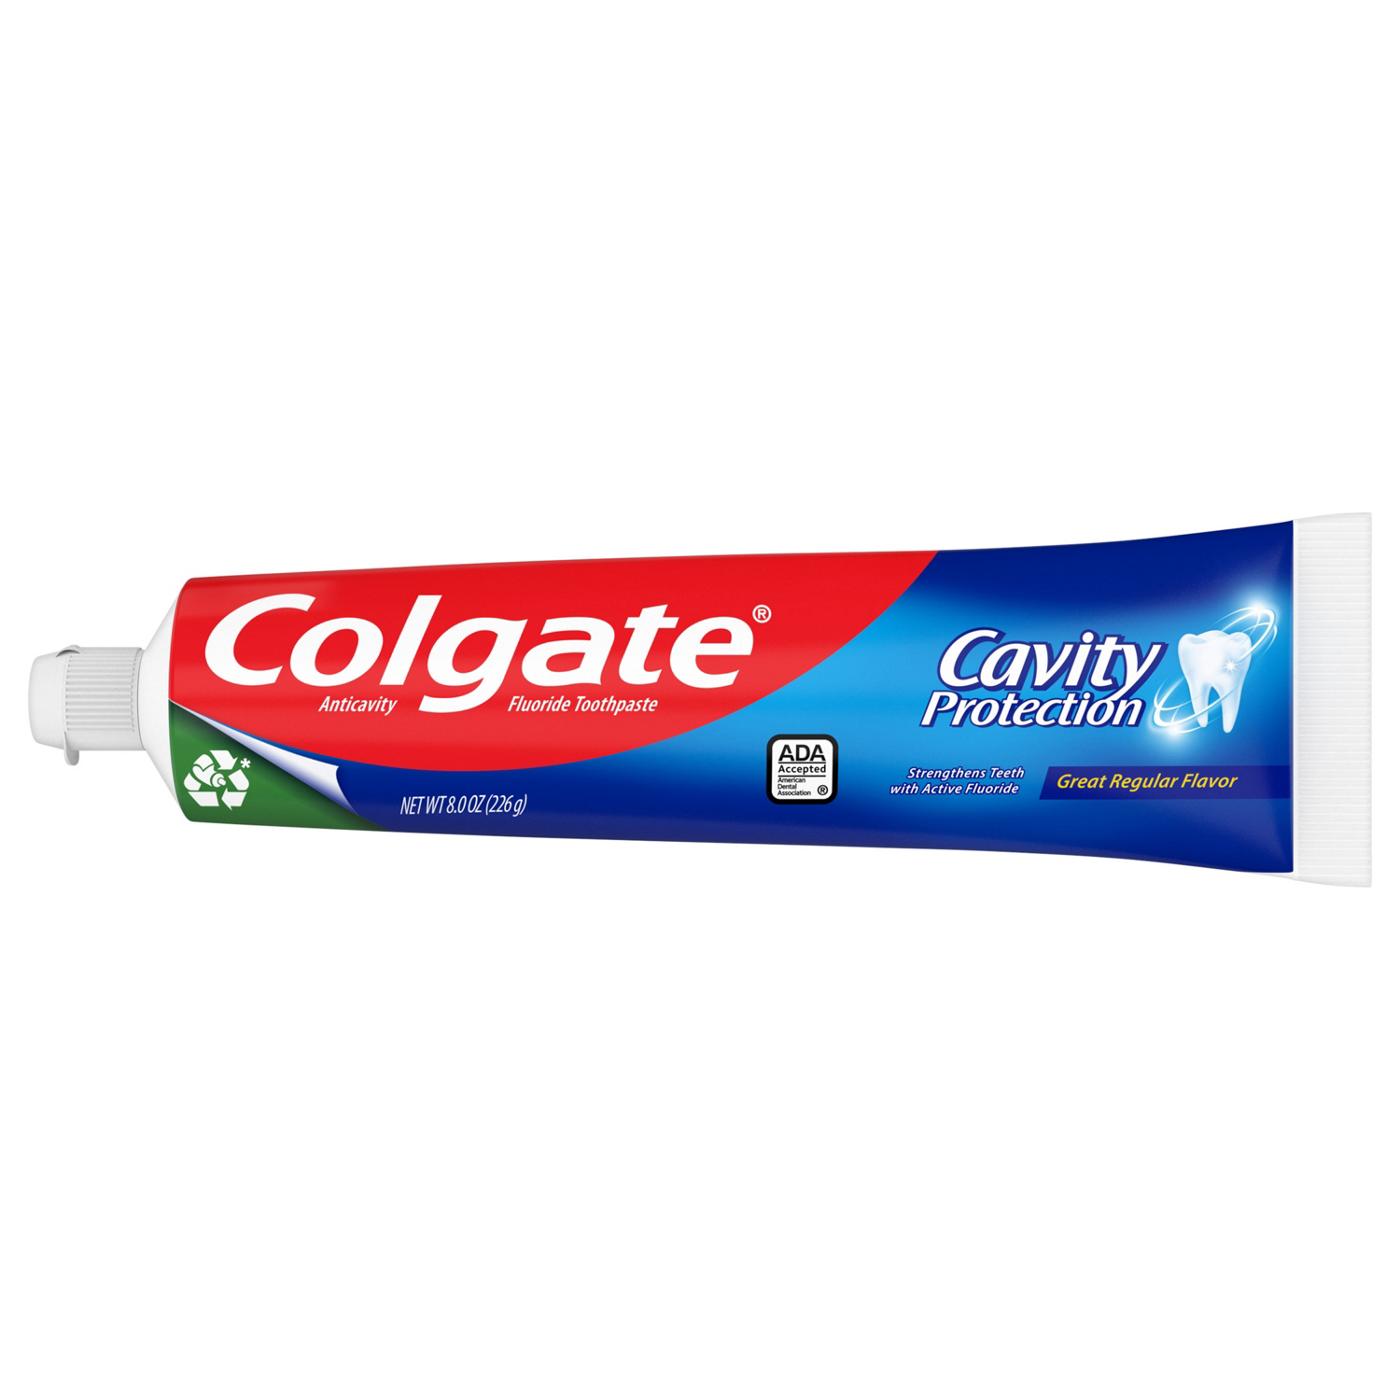 Colgate Cavity Protection Toothpaste; image 3 of 3